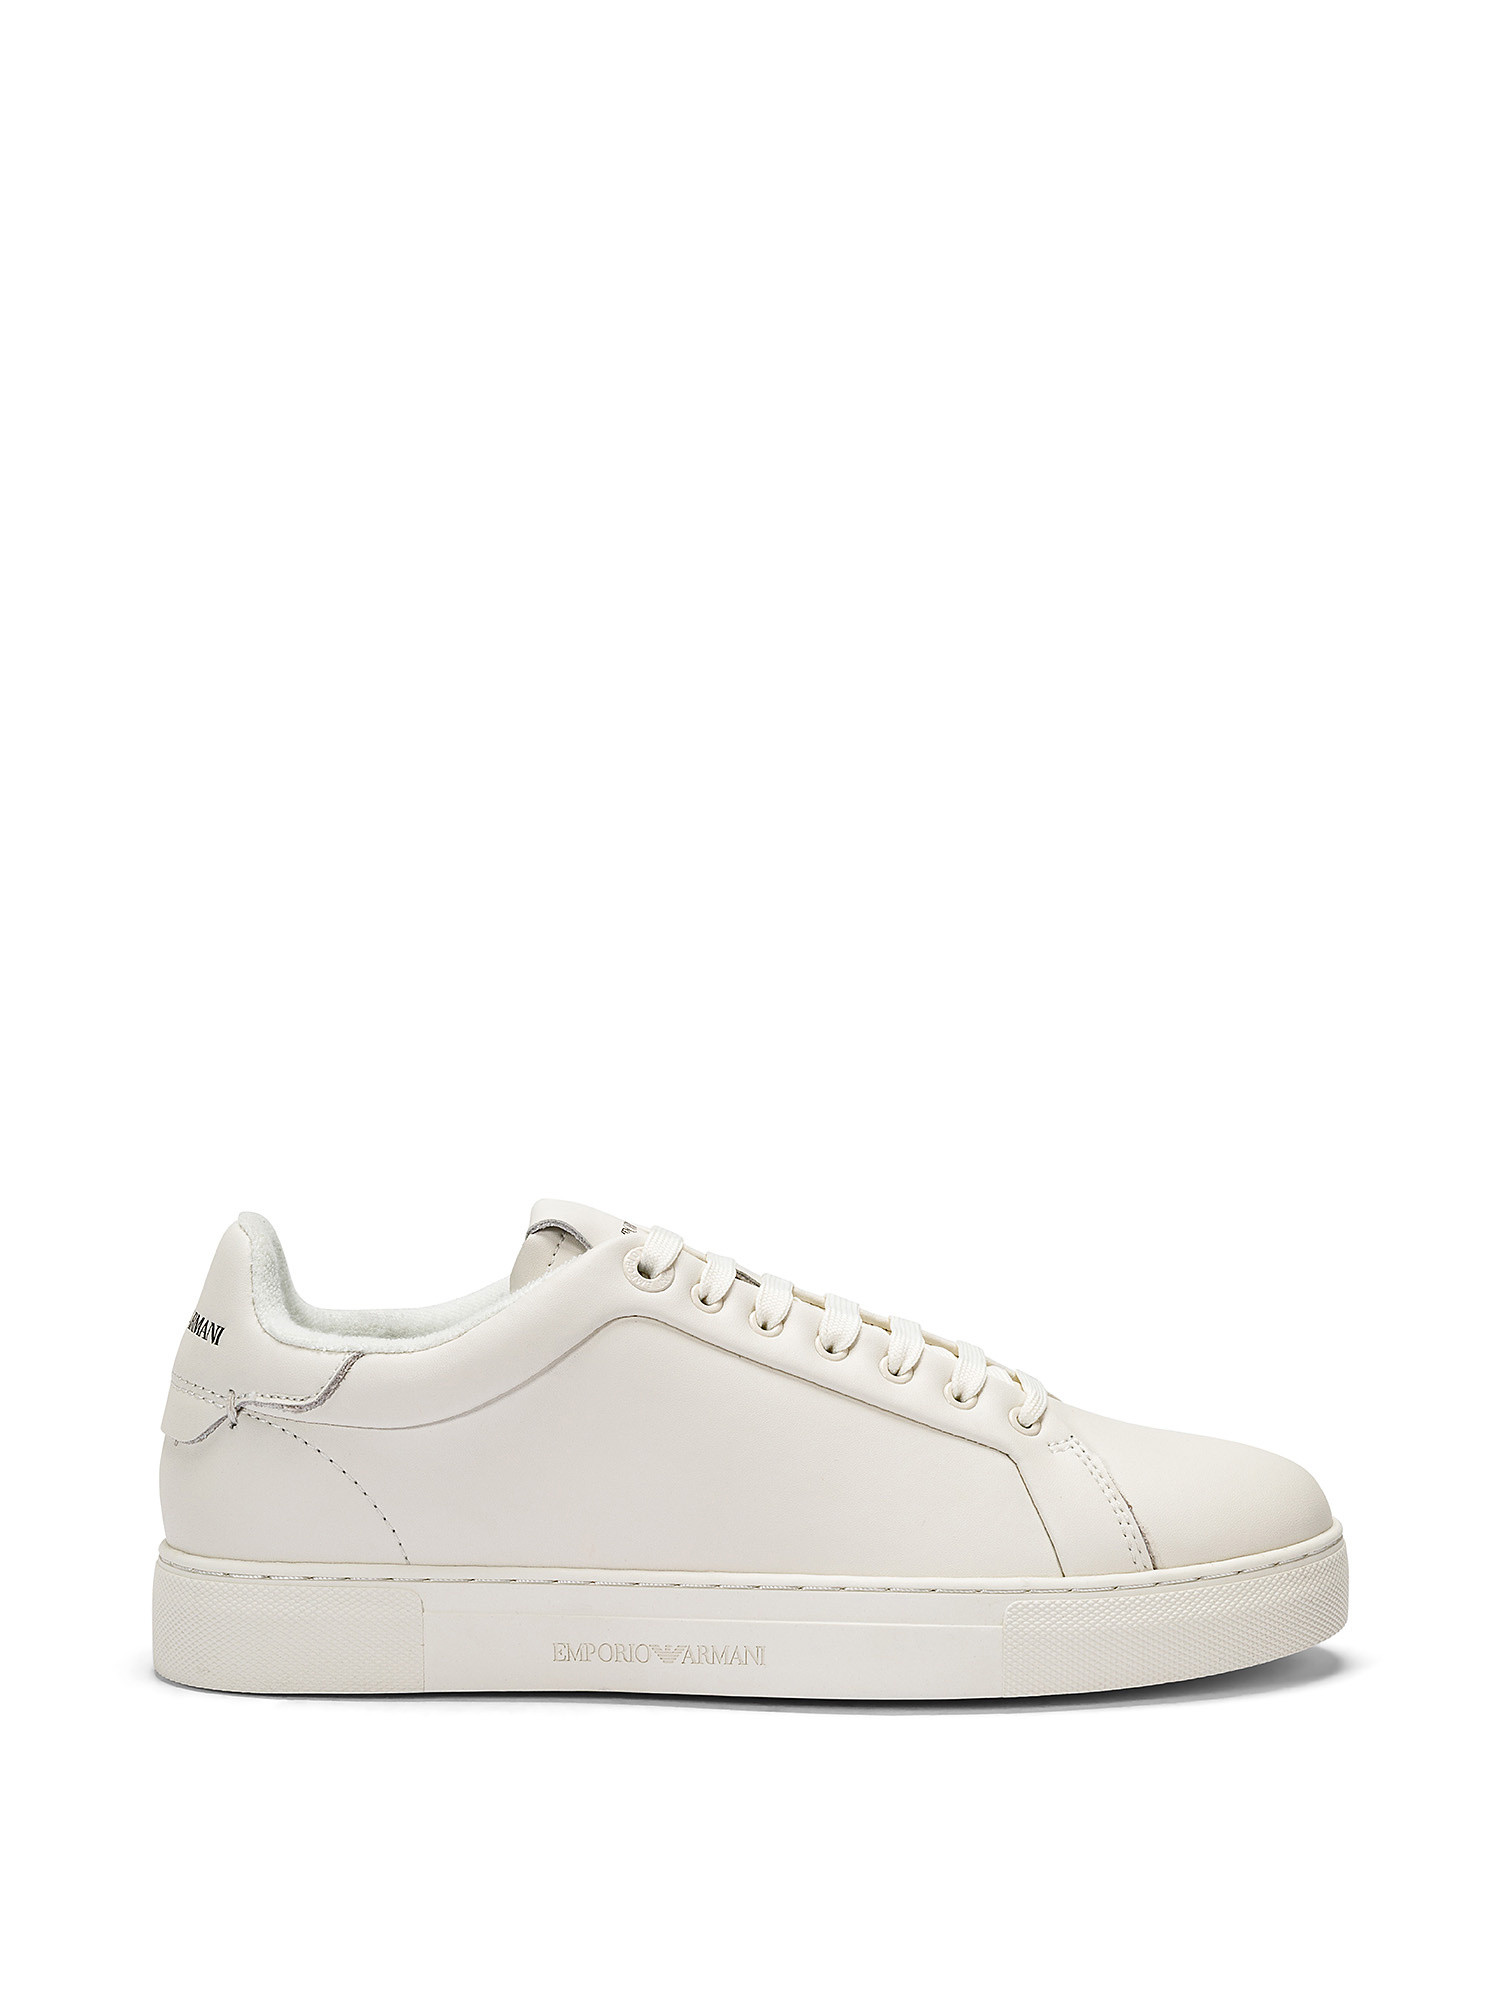 Emporio Armani - Sneakers, Bianco, large image number 0